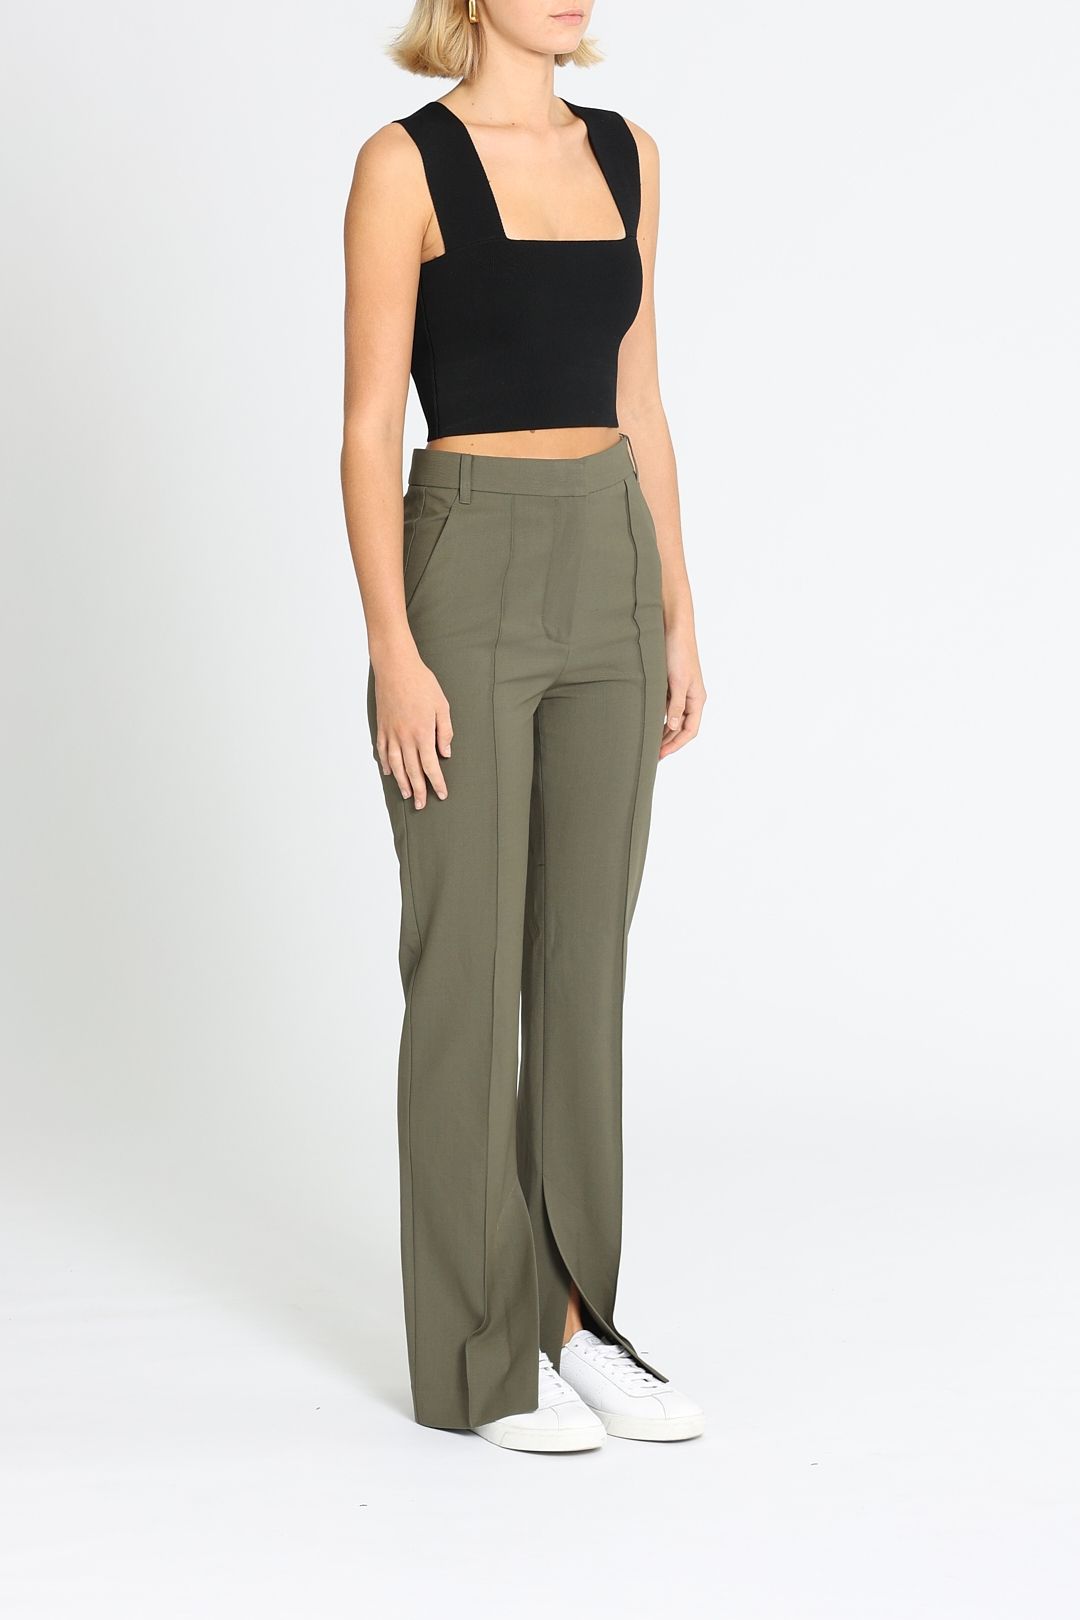 Camilla and Marc Mateo Tailored Pant Willow Green Pleat